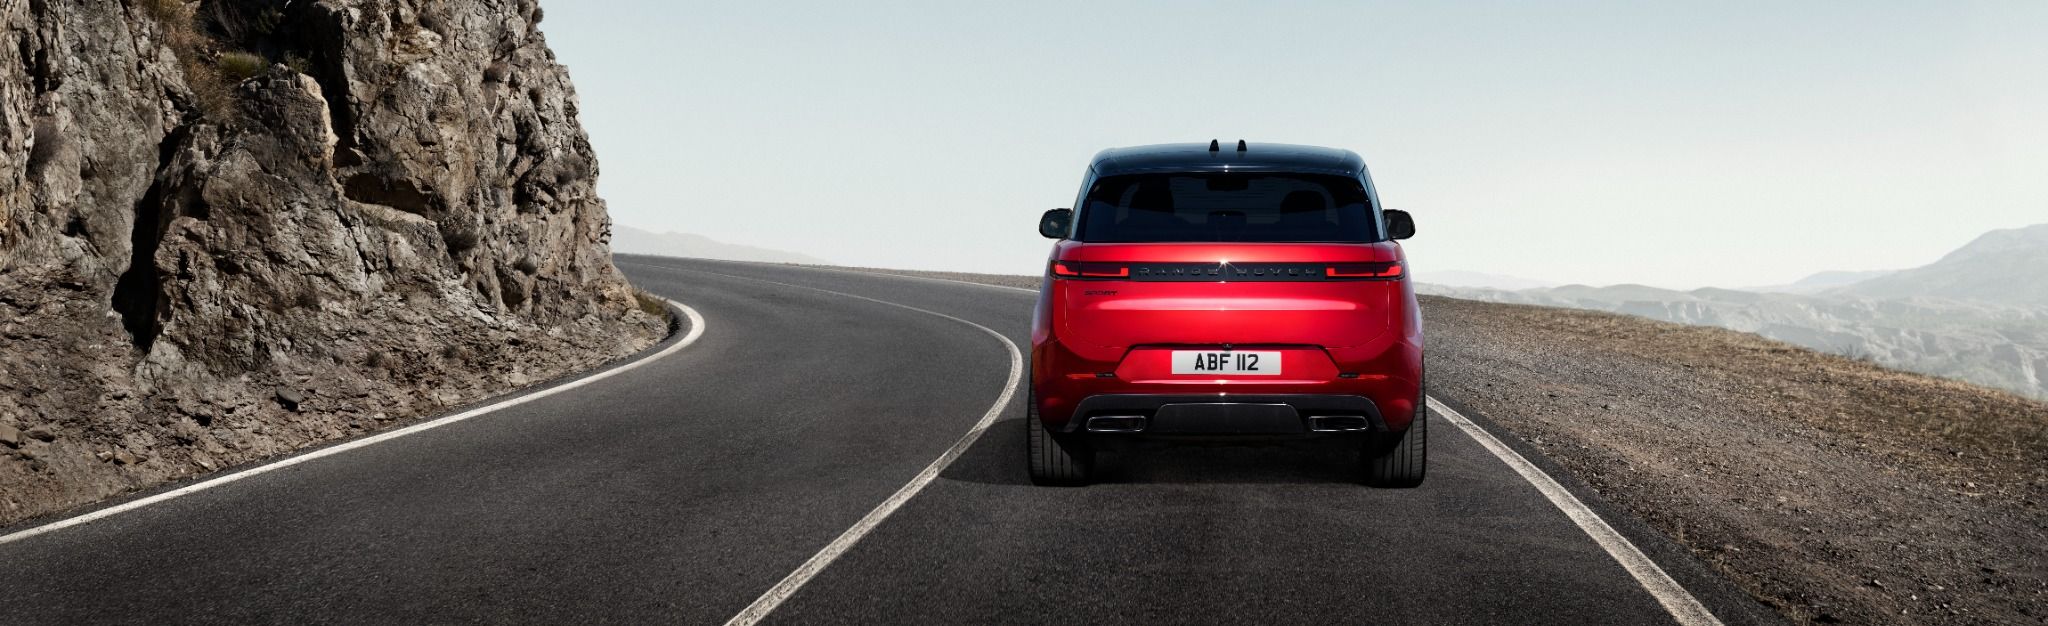 Rear view of Range Rover Sport driving on a road